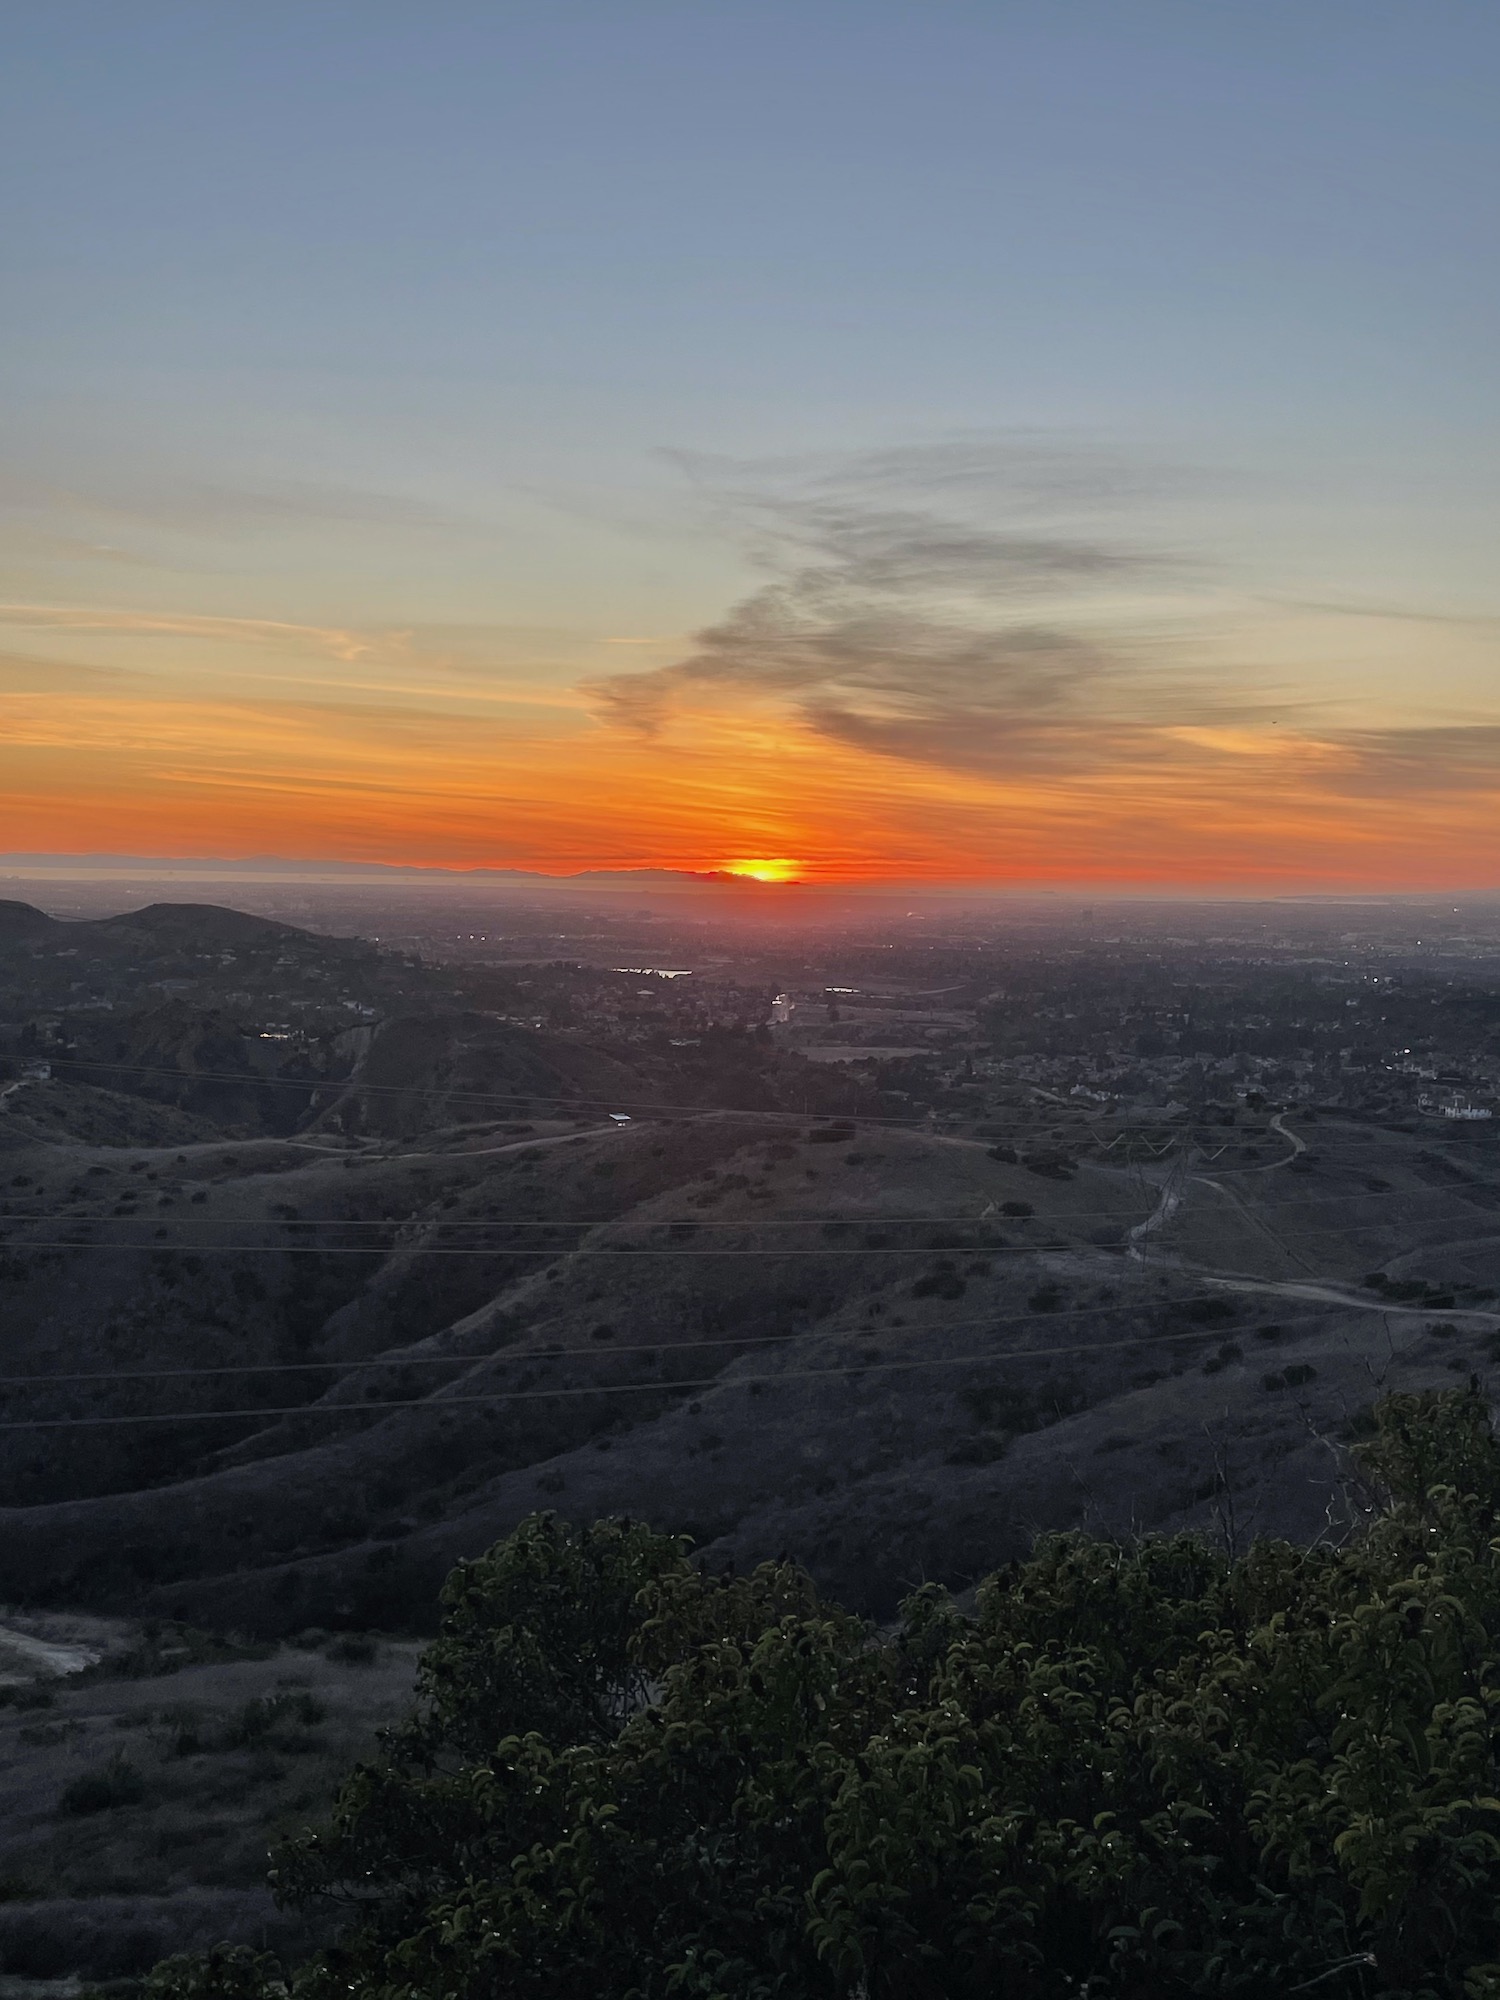 Sunset over pacific ocean - robbers roost vantage point - anaheim hills -2